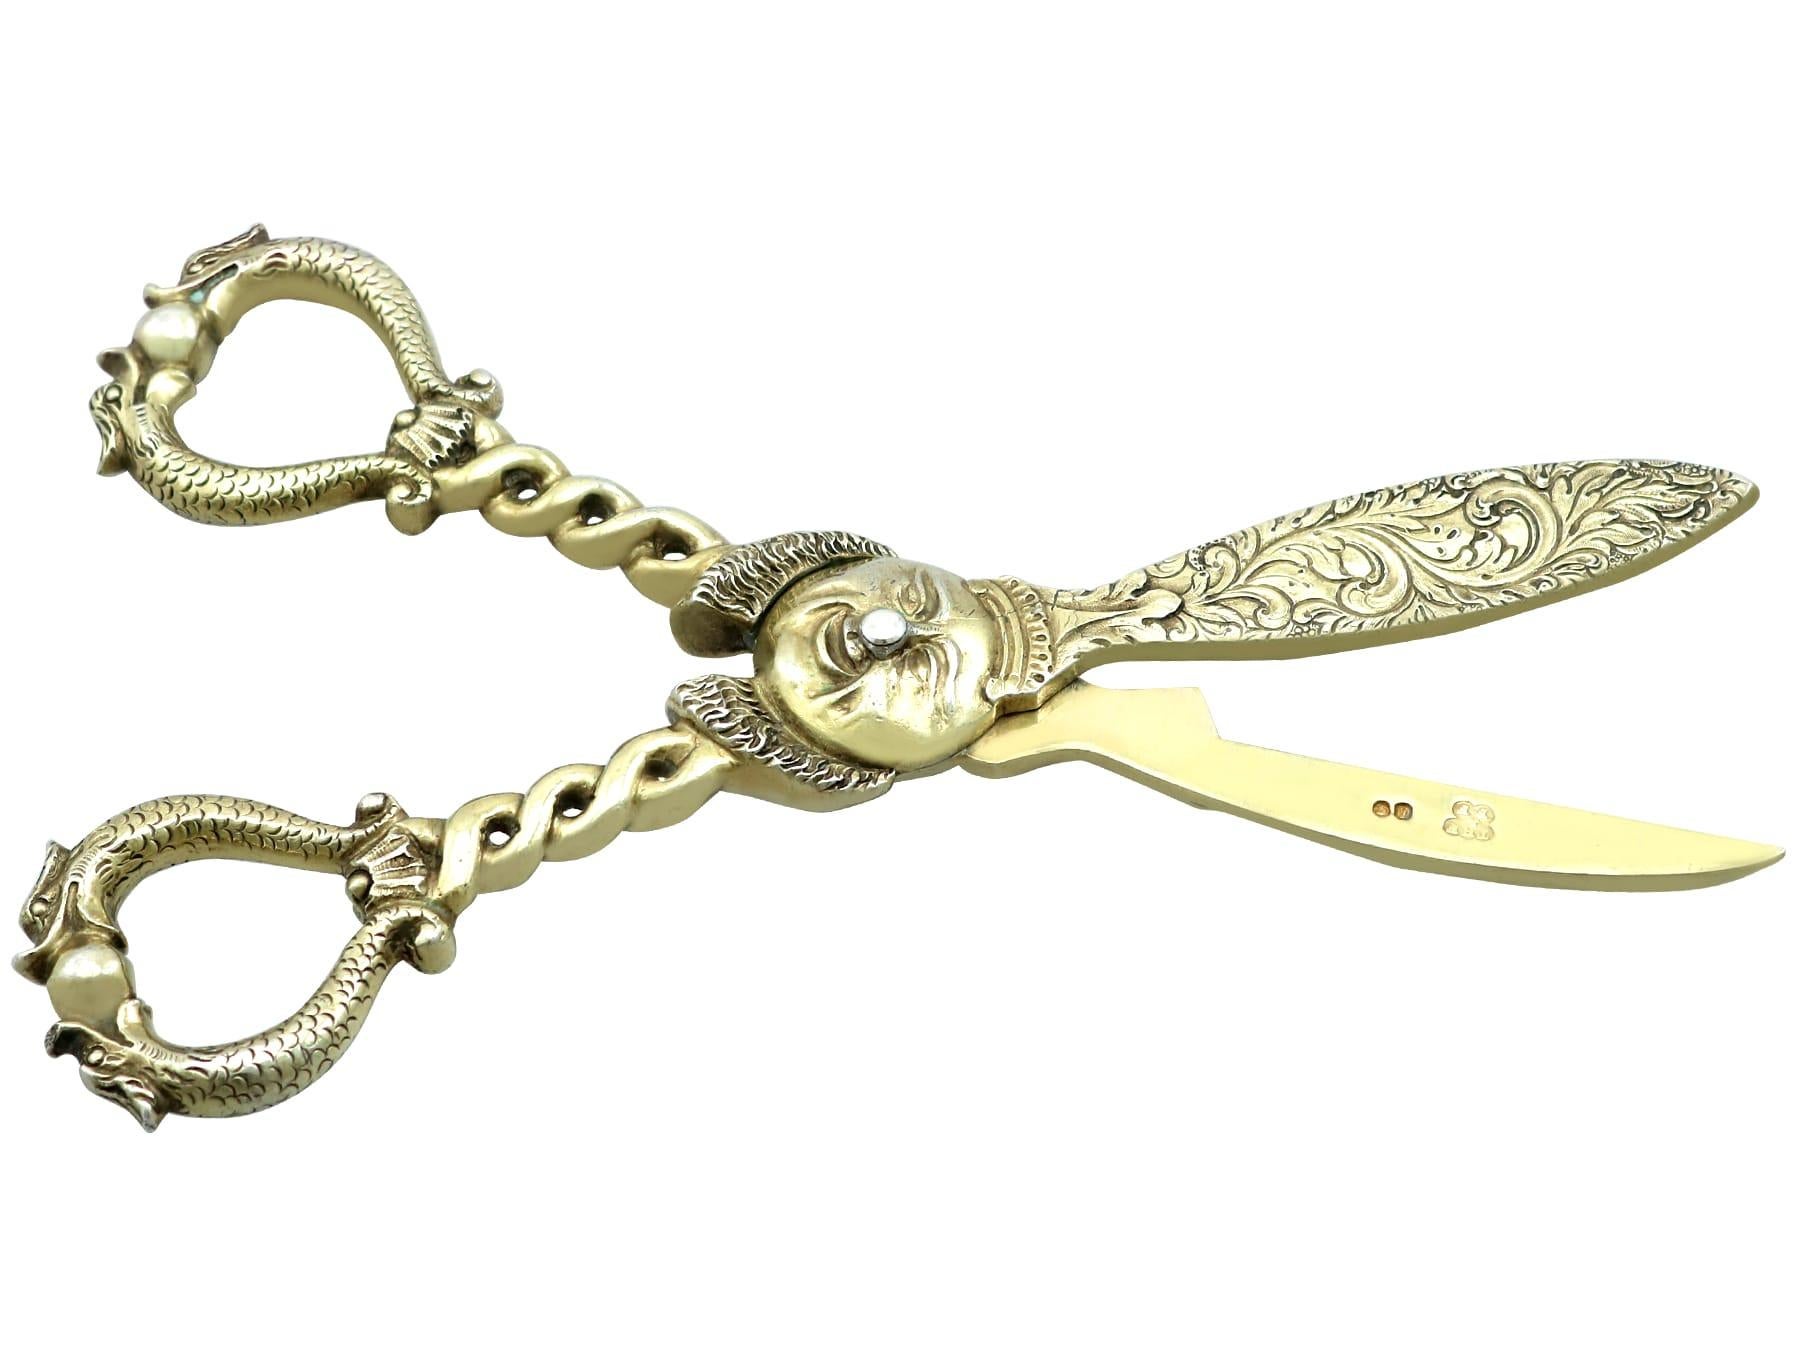 Antique Sterling Silver Gilt Grape Shears '1854' In Excellent Condition For Sale In Jesmond, Newcastle Upon Tyne